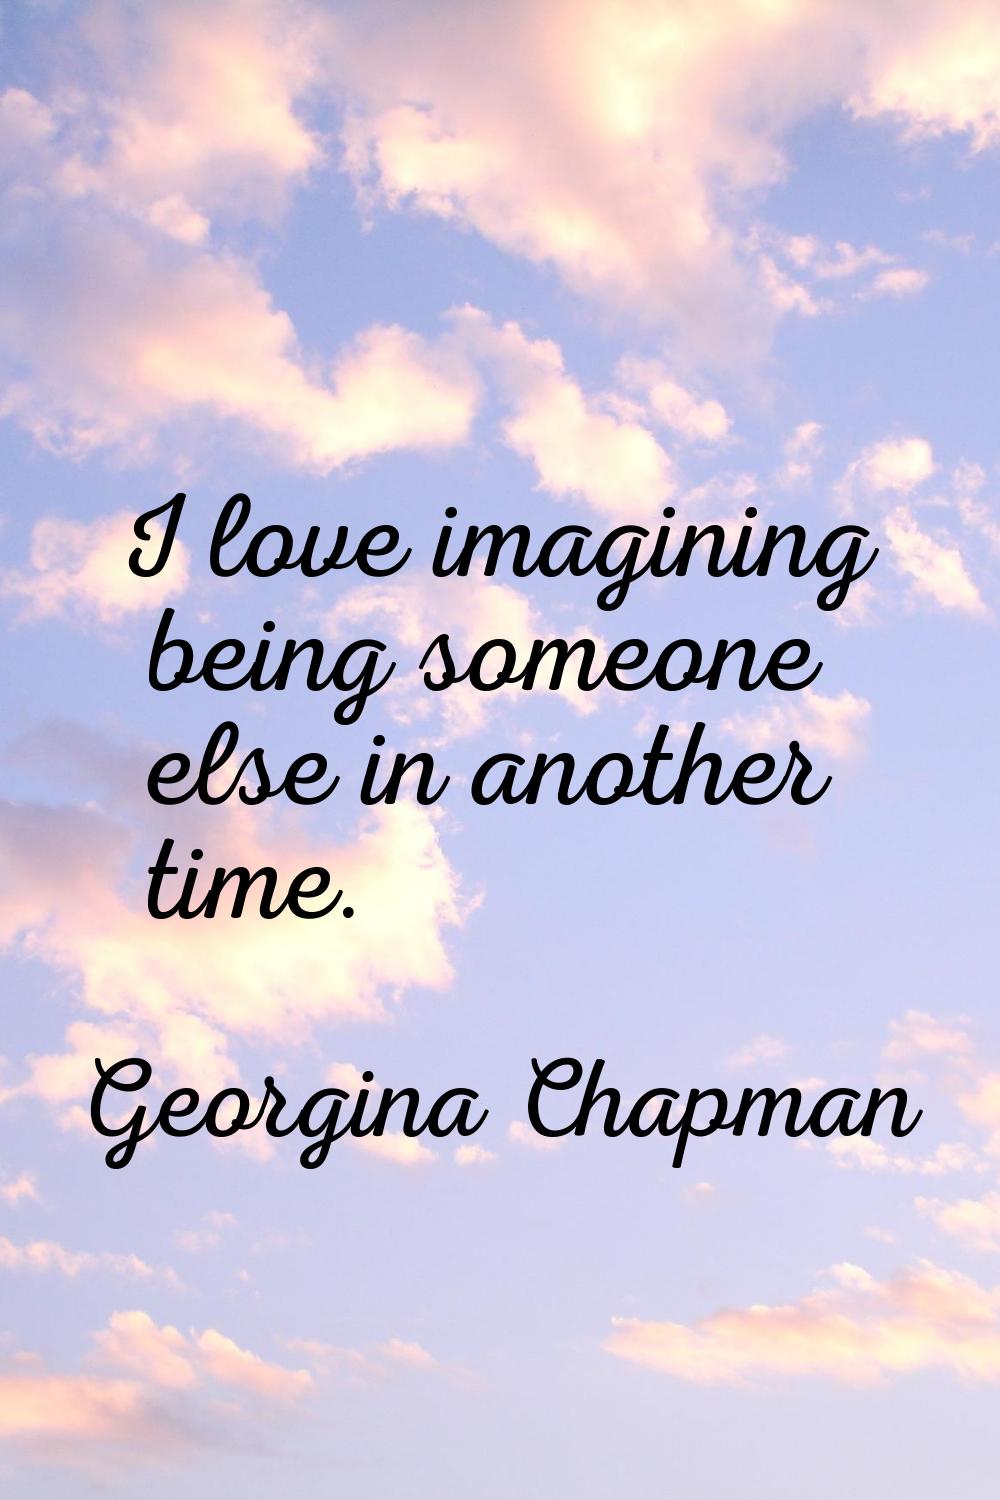 I love imagining being someone else in another time.